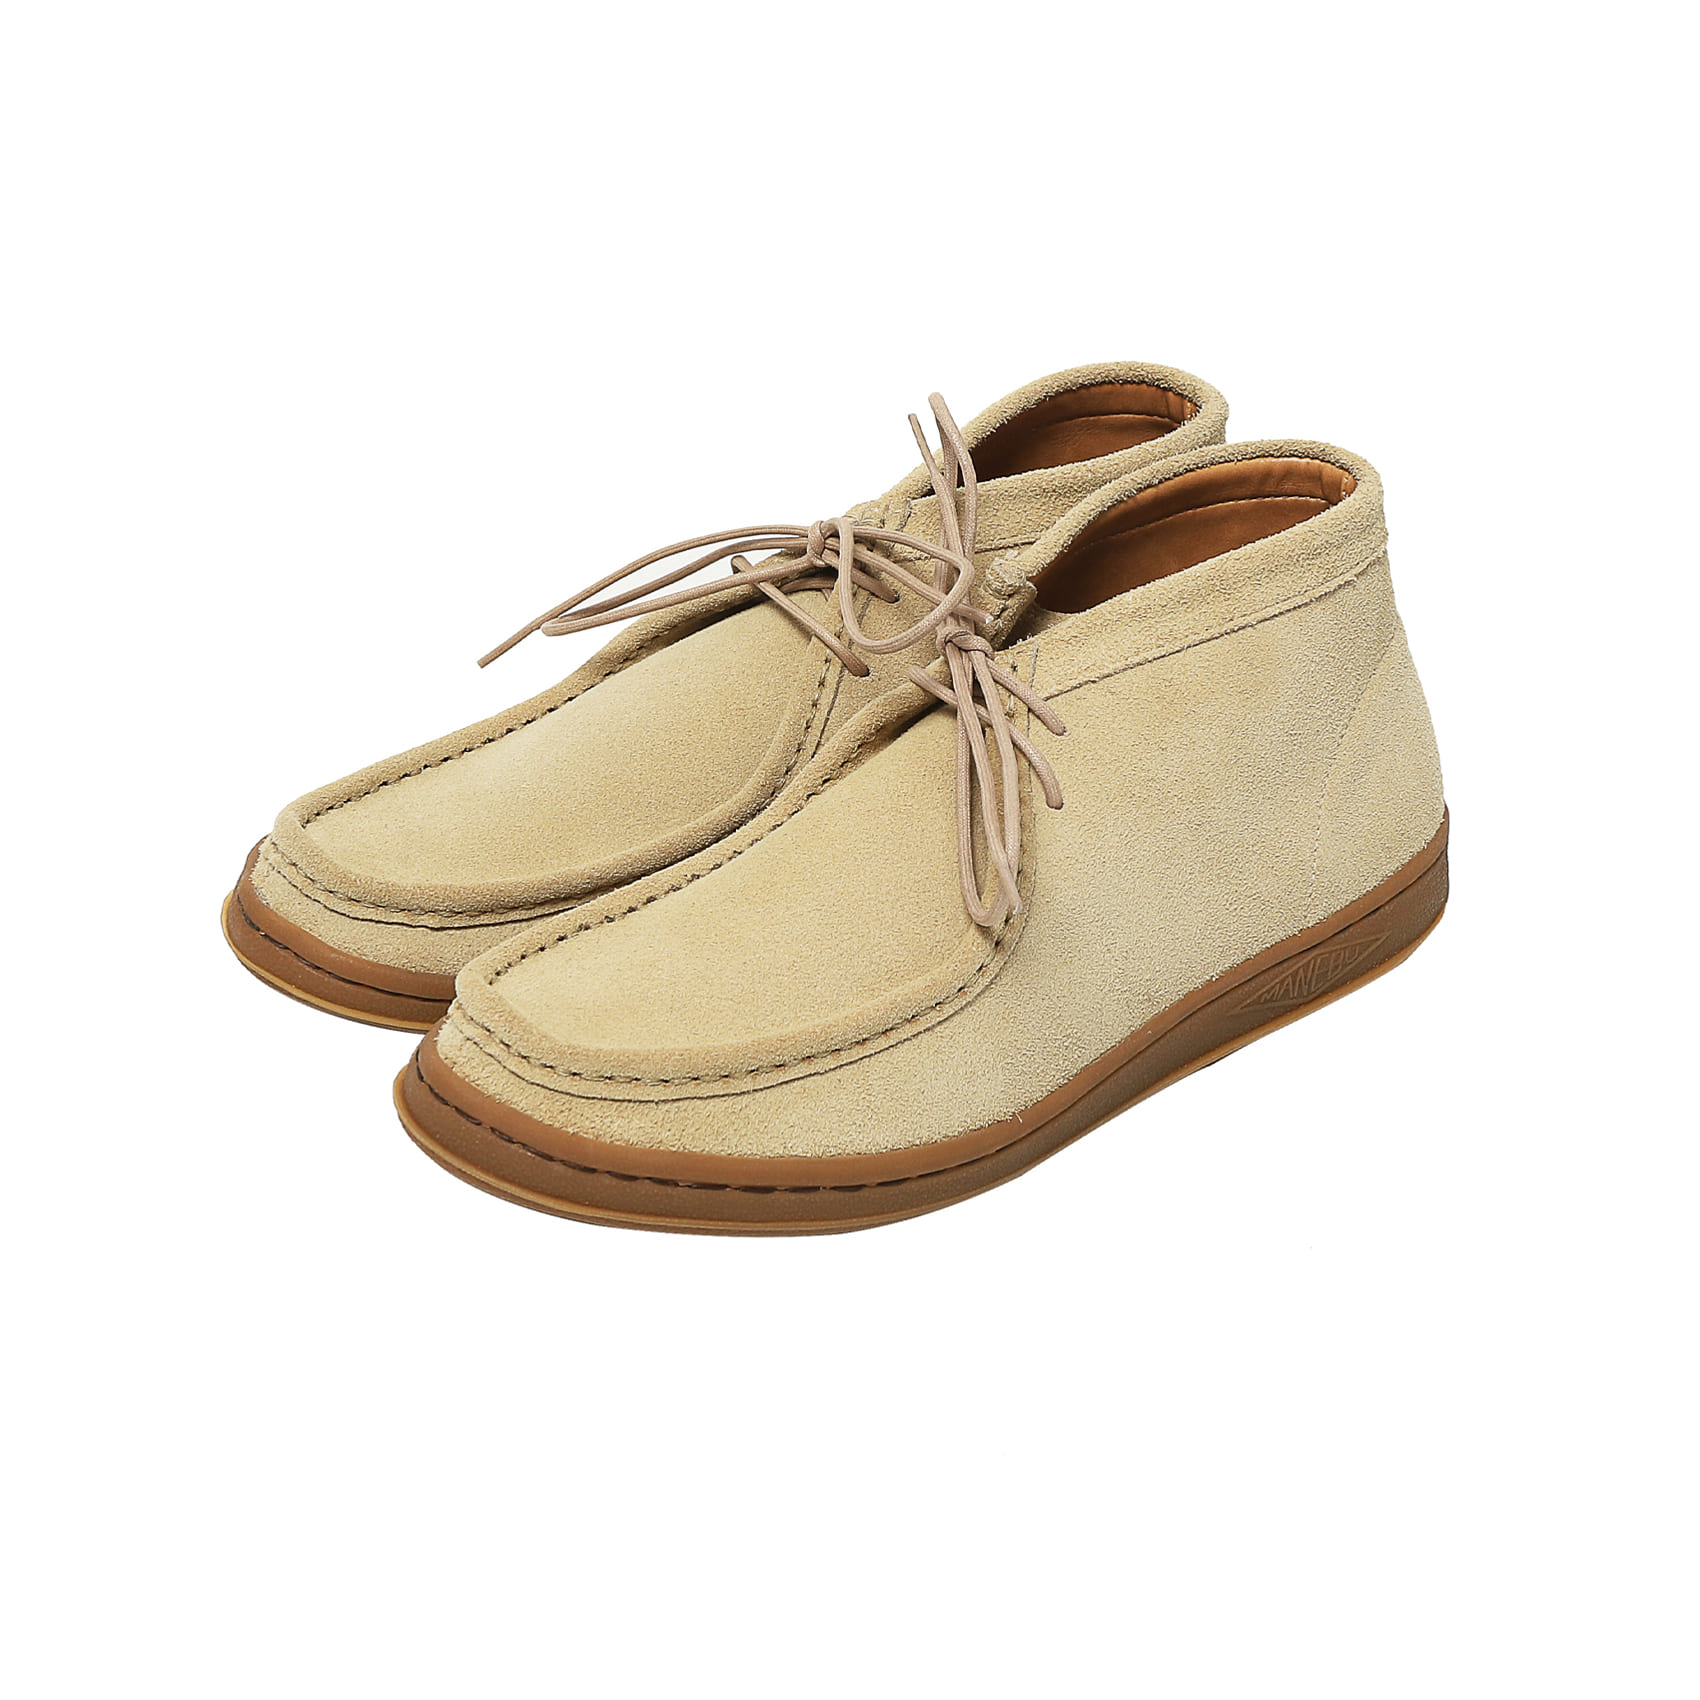 BOO MID SUEDE - SAND BEIGE